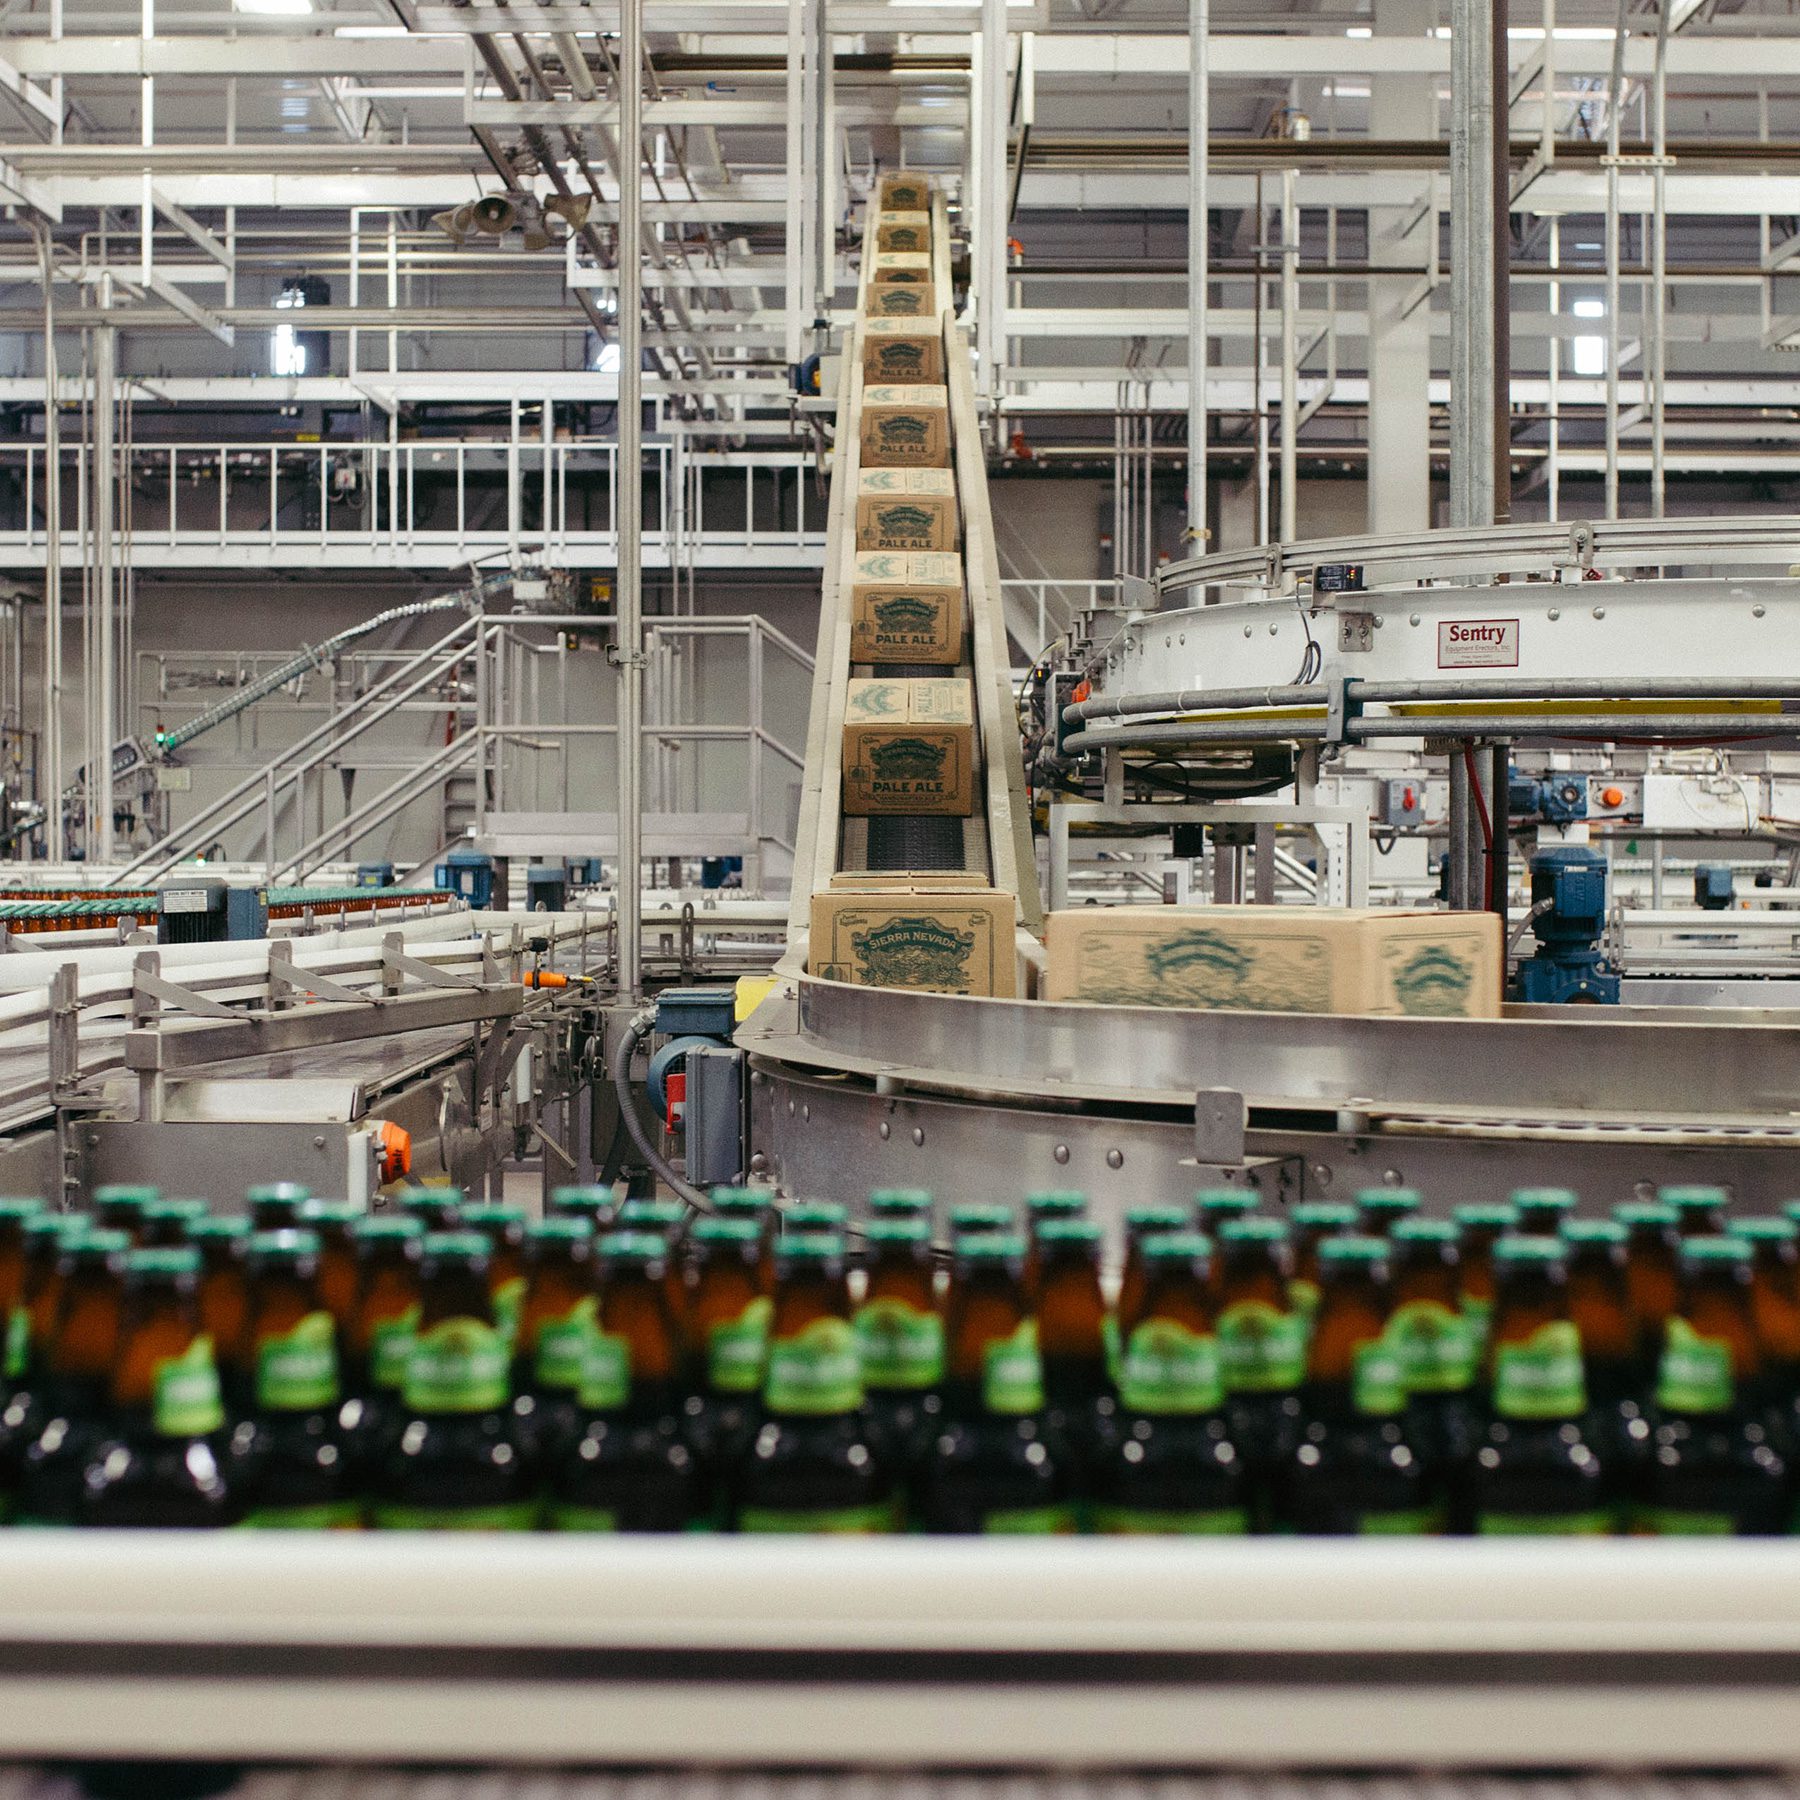 Bottles and boxes of Sierra Nevada Pale Ale on packaging line conveyer belts